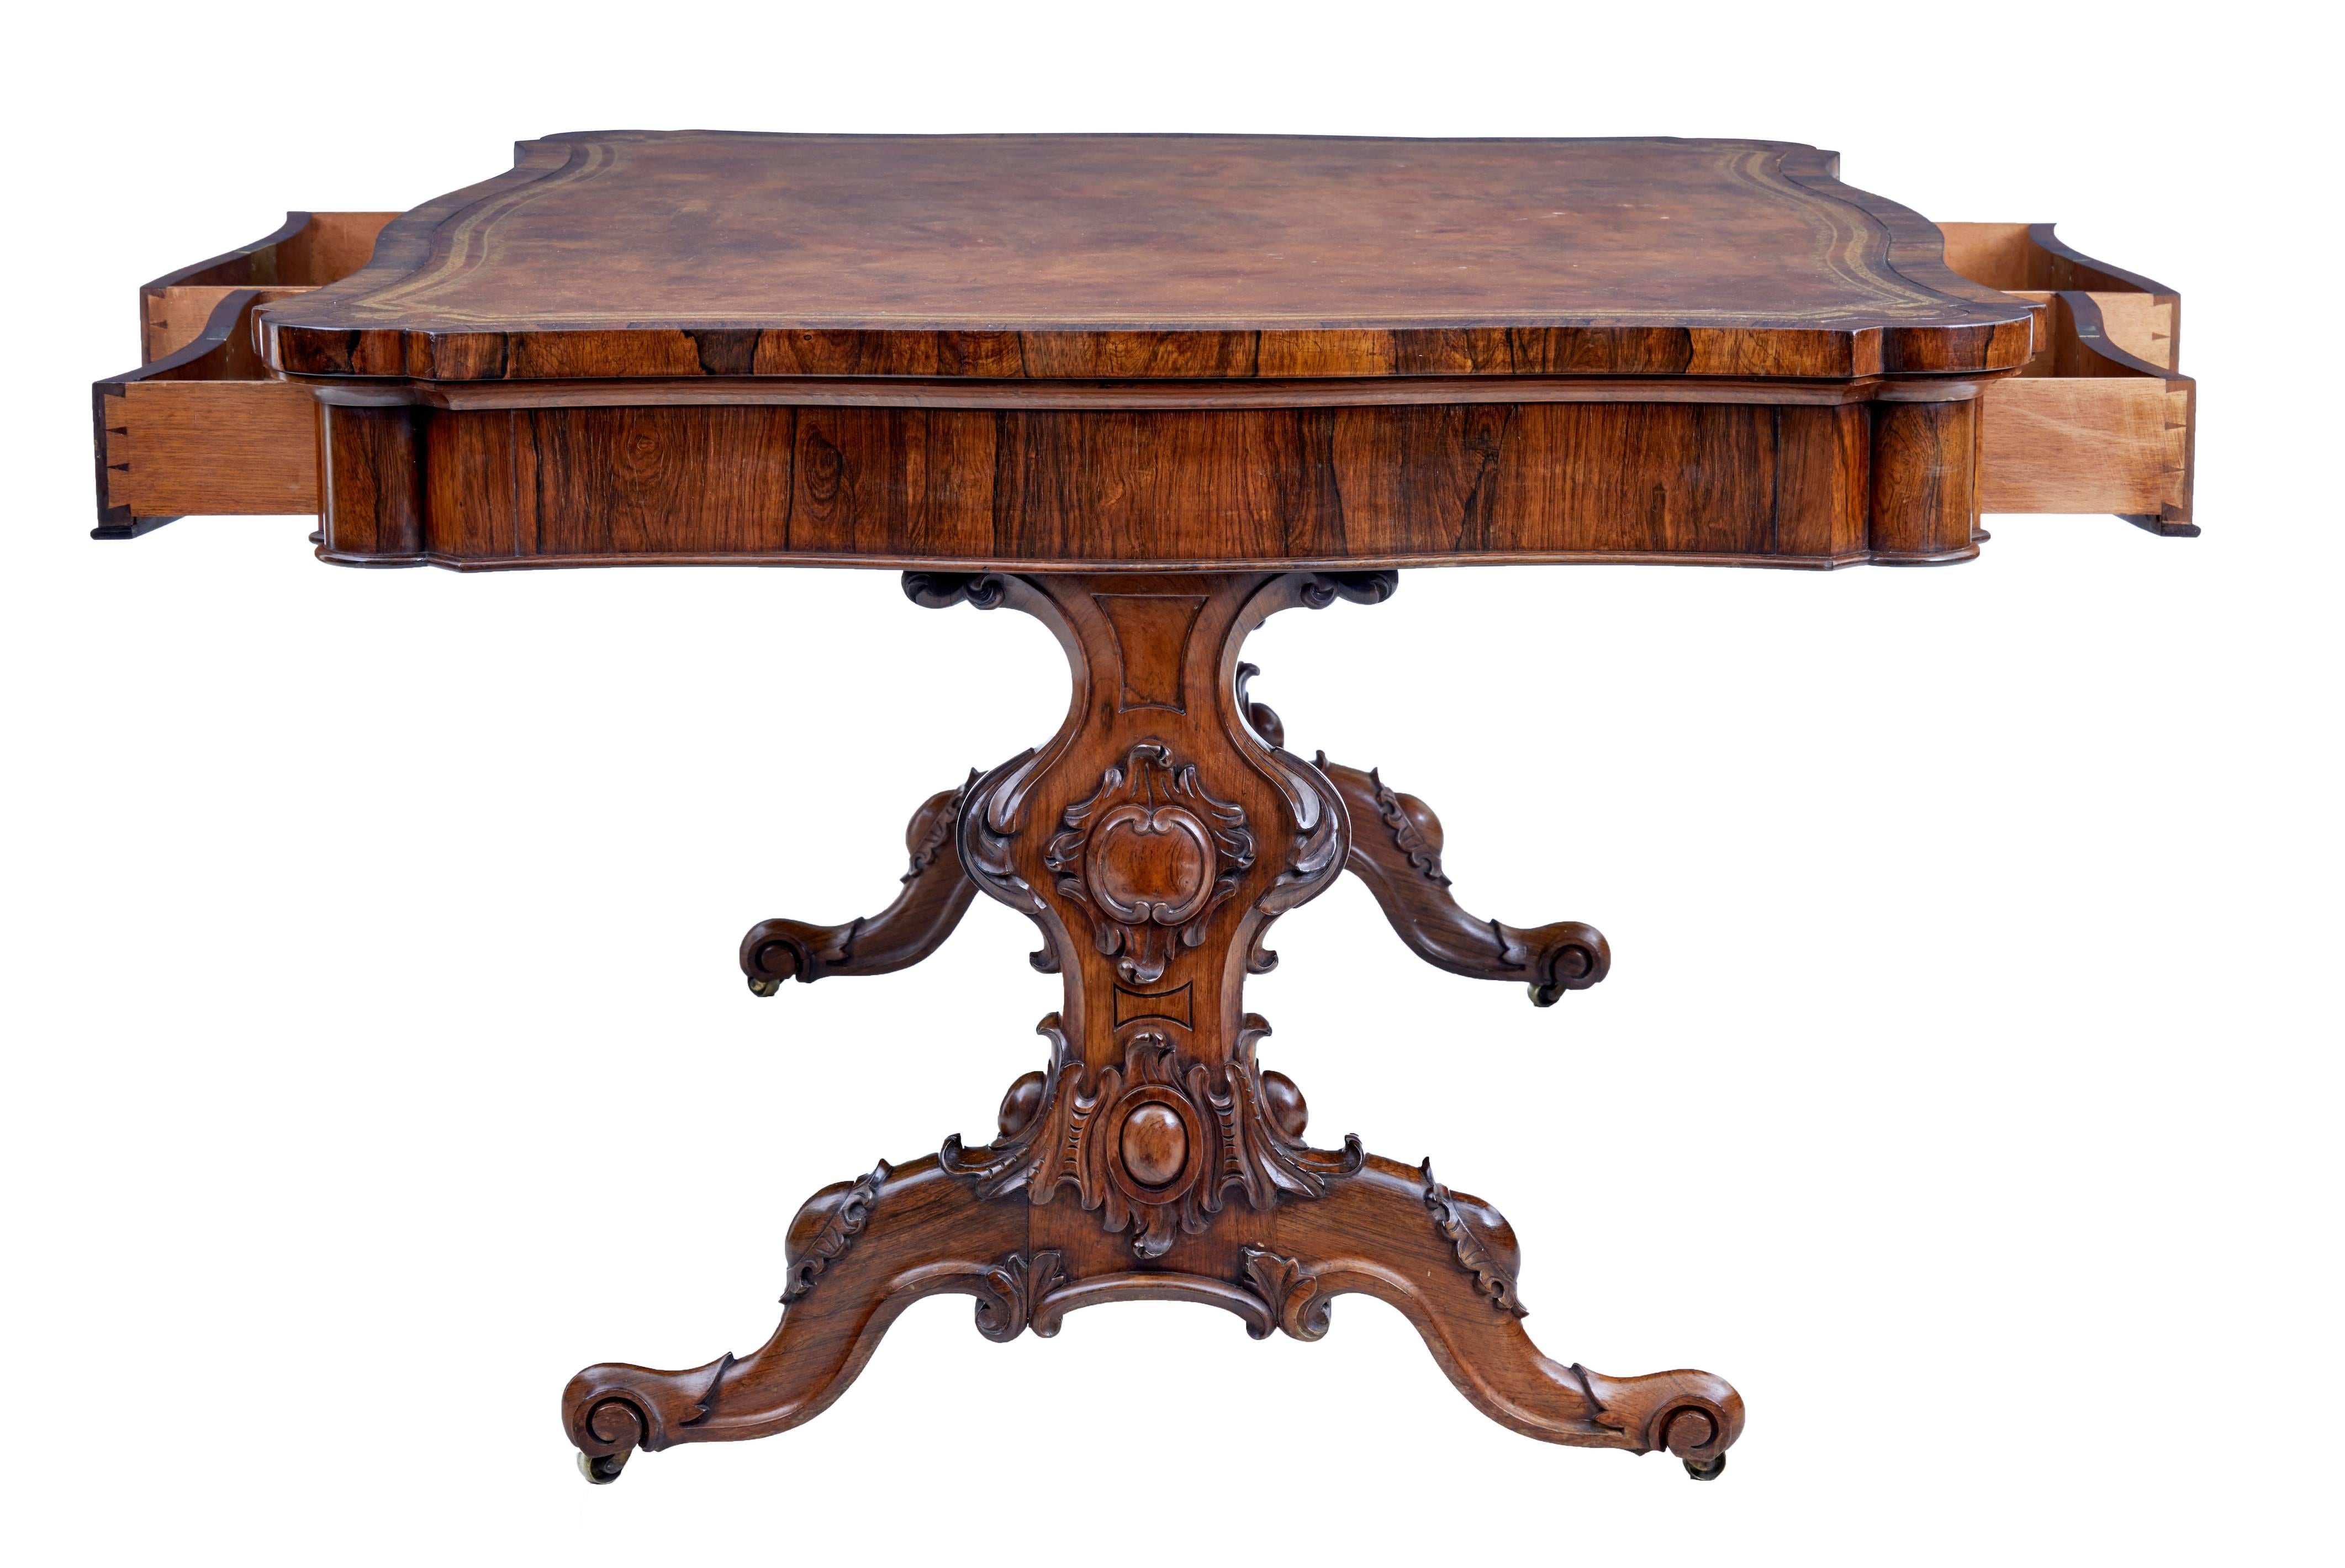 William IV Large 19th Century William iv Rosewood Library Table Attributed to Gillows